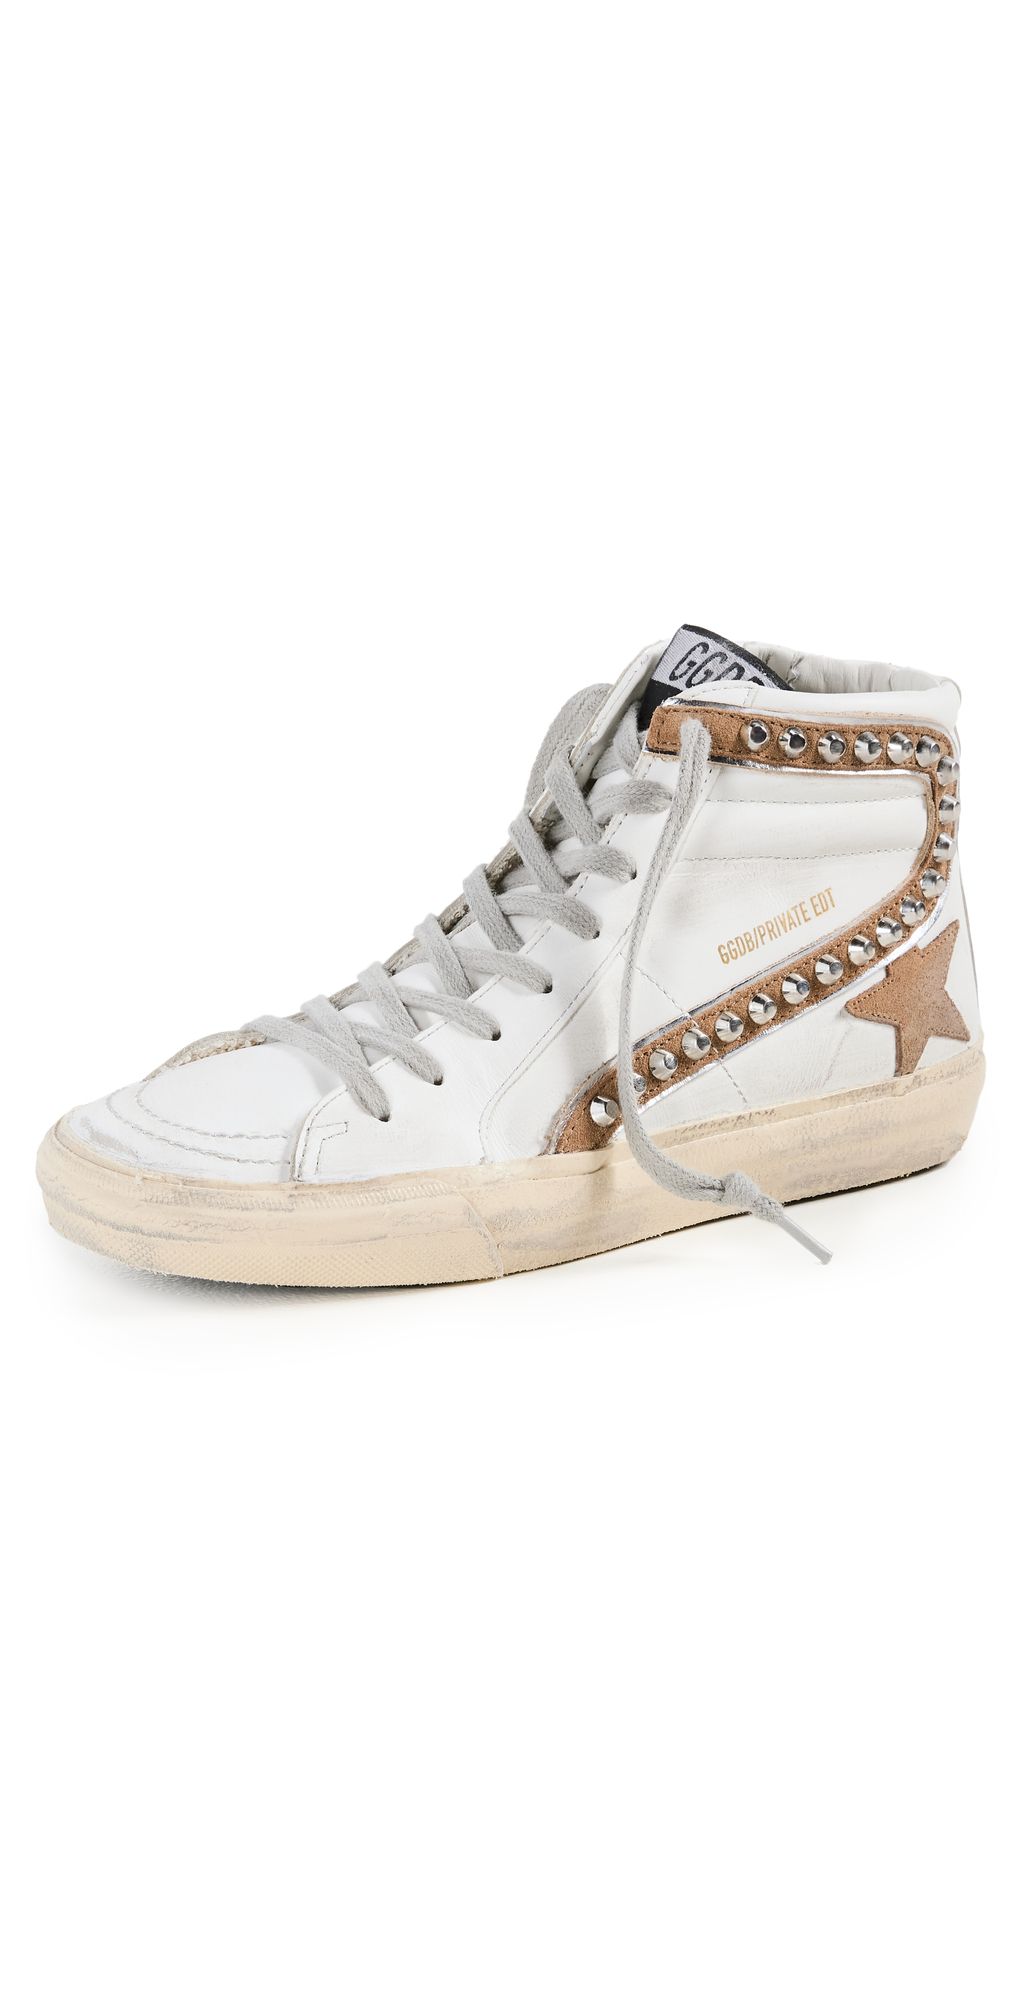 Slide Classic Leather Sneakers | Shopbop